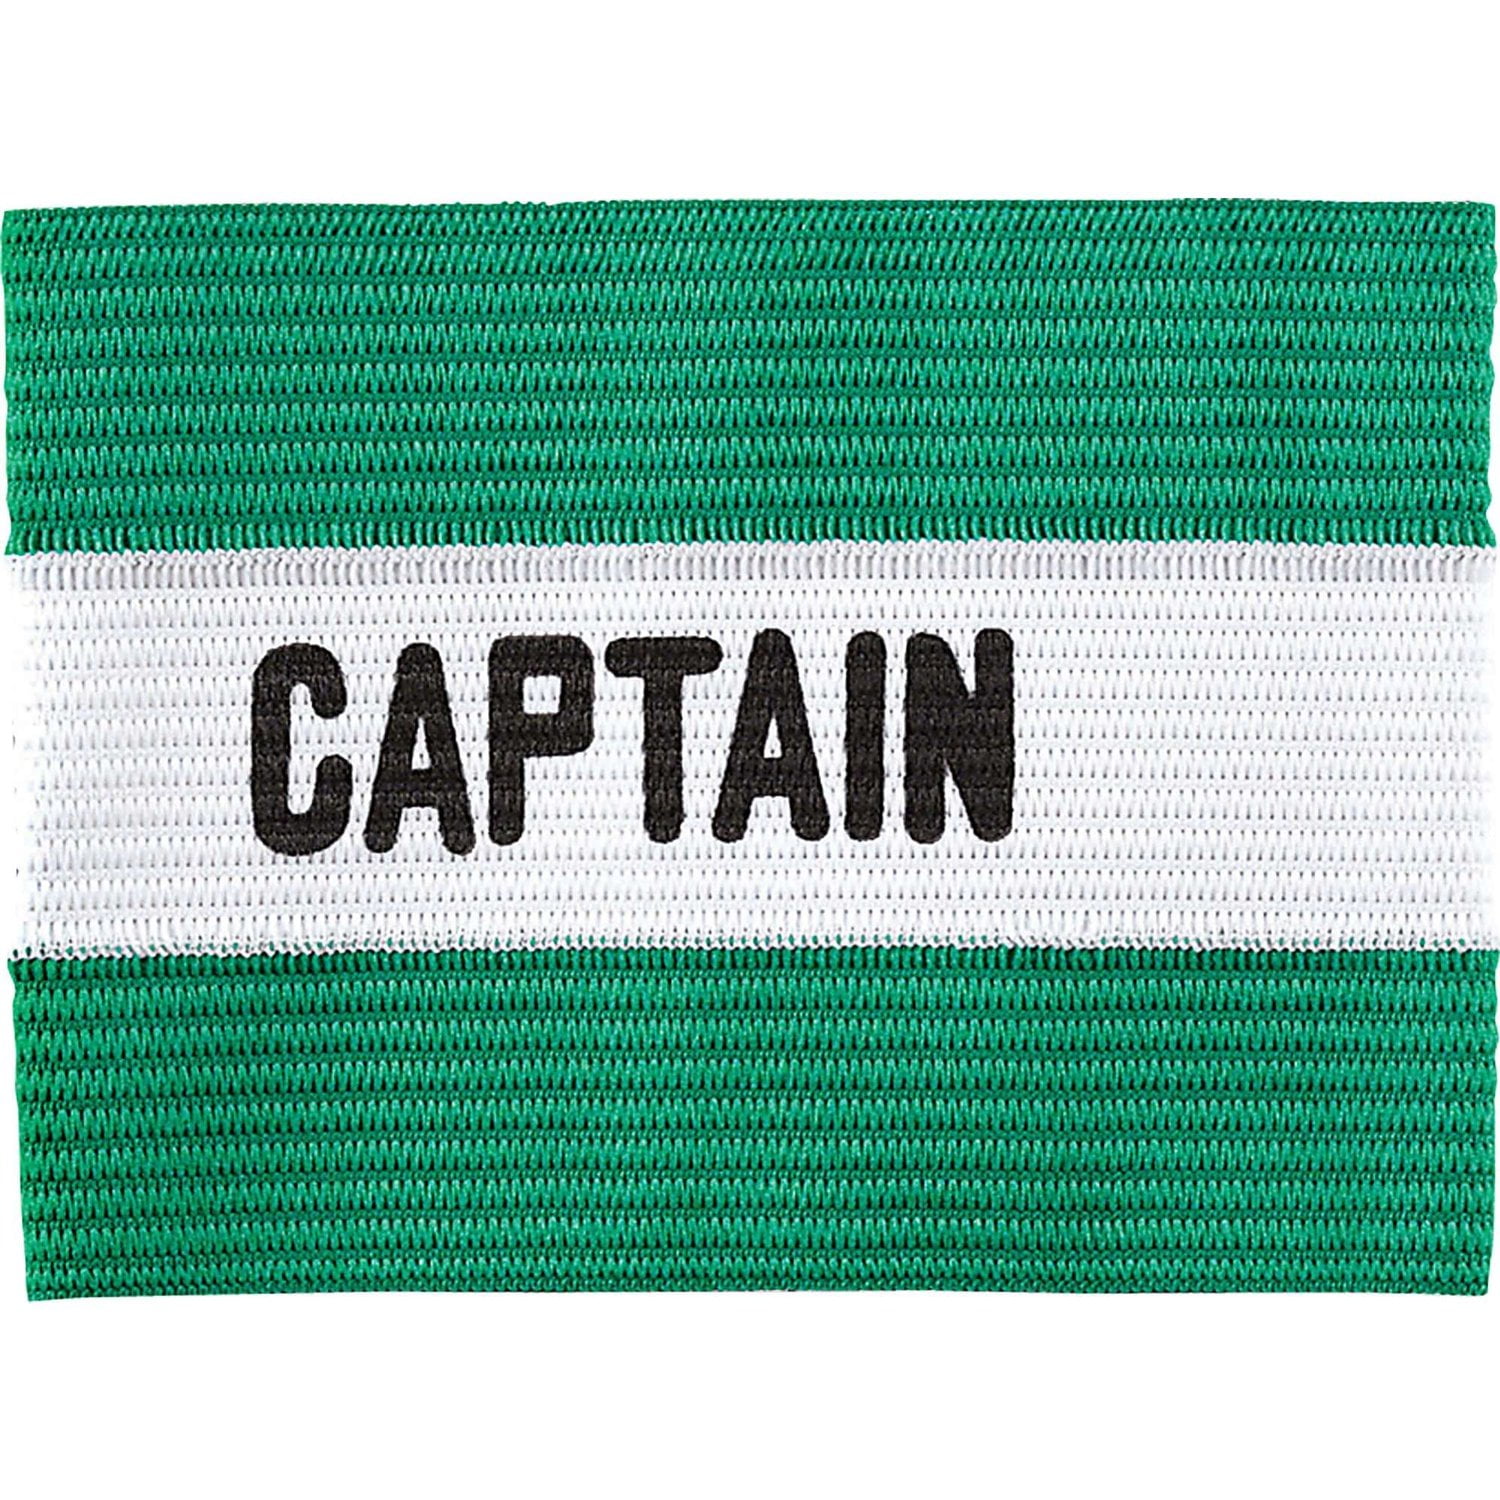 Youths & Men's Elasticated Sports Captains Armband Band Adjustable #2 green 